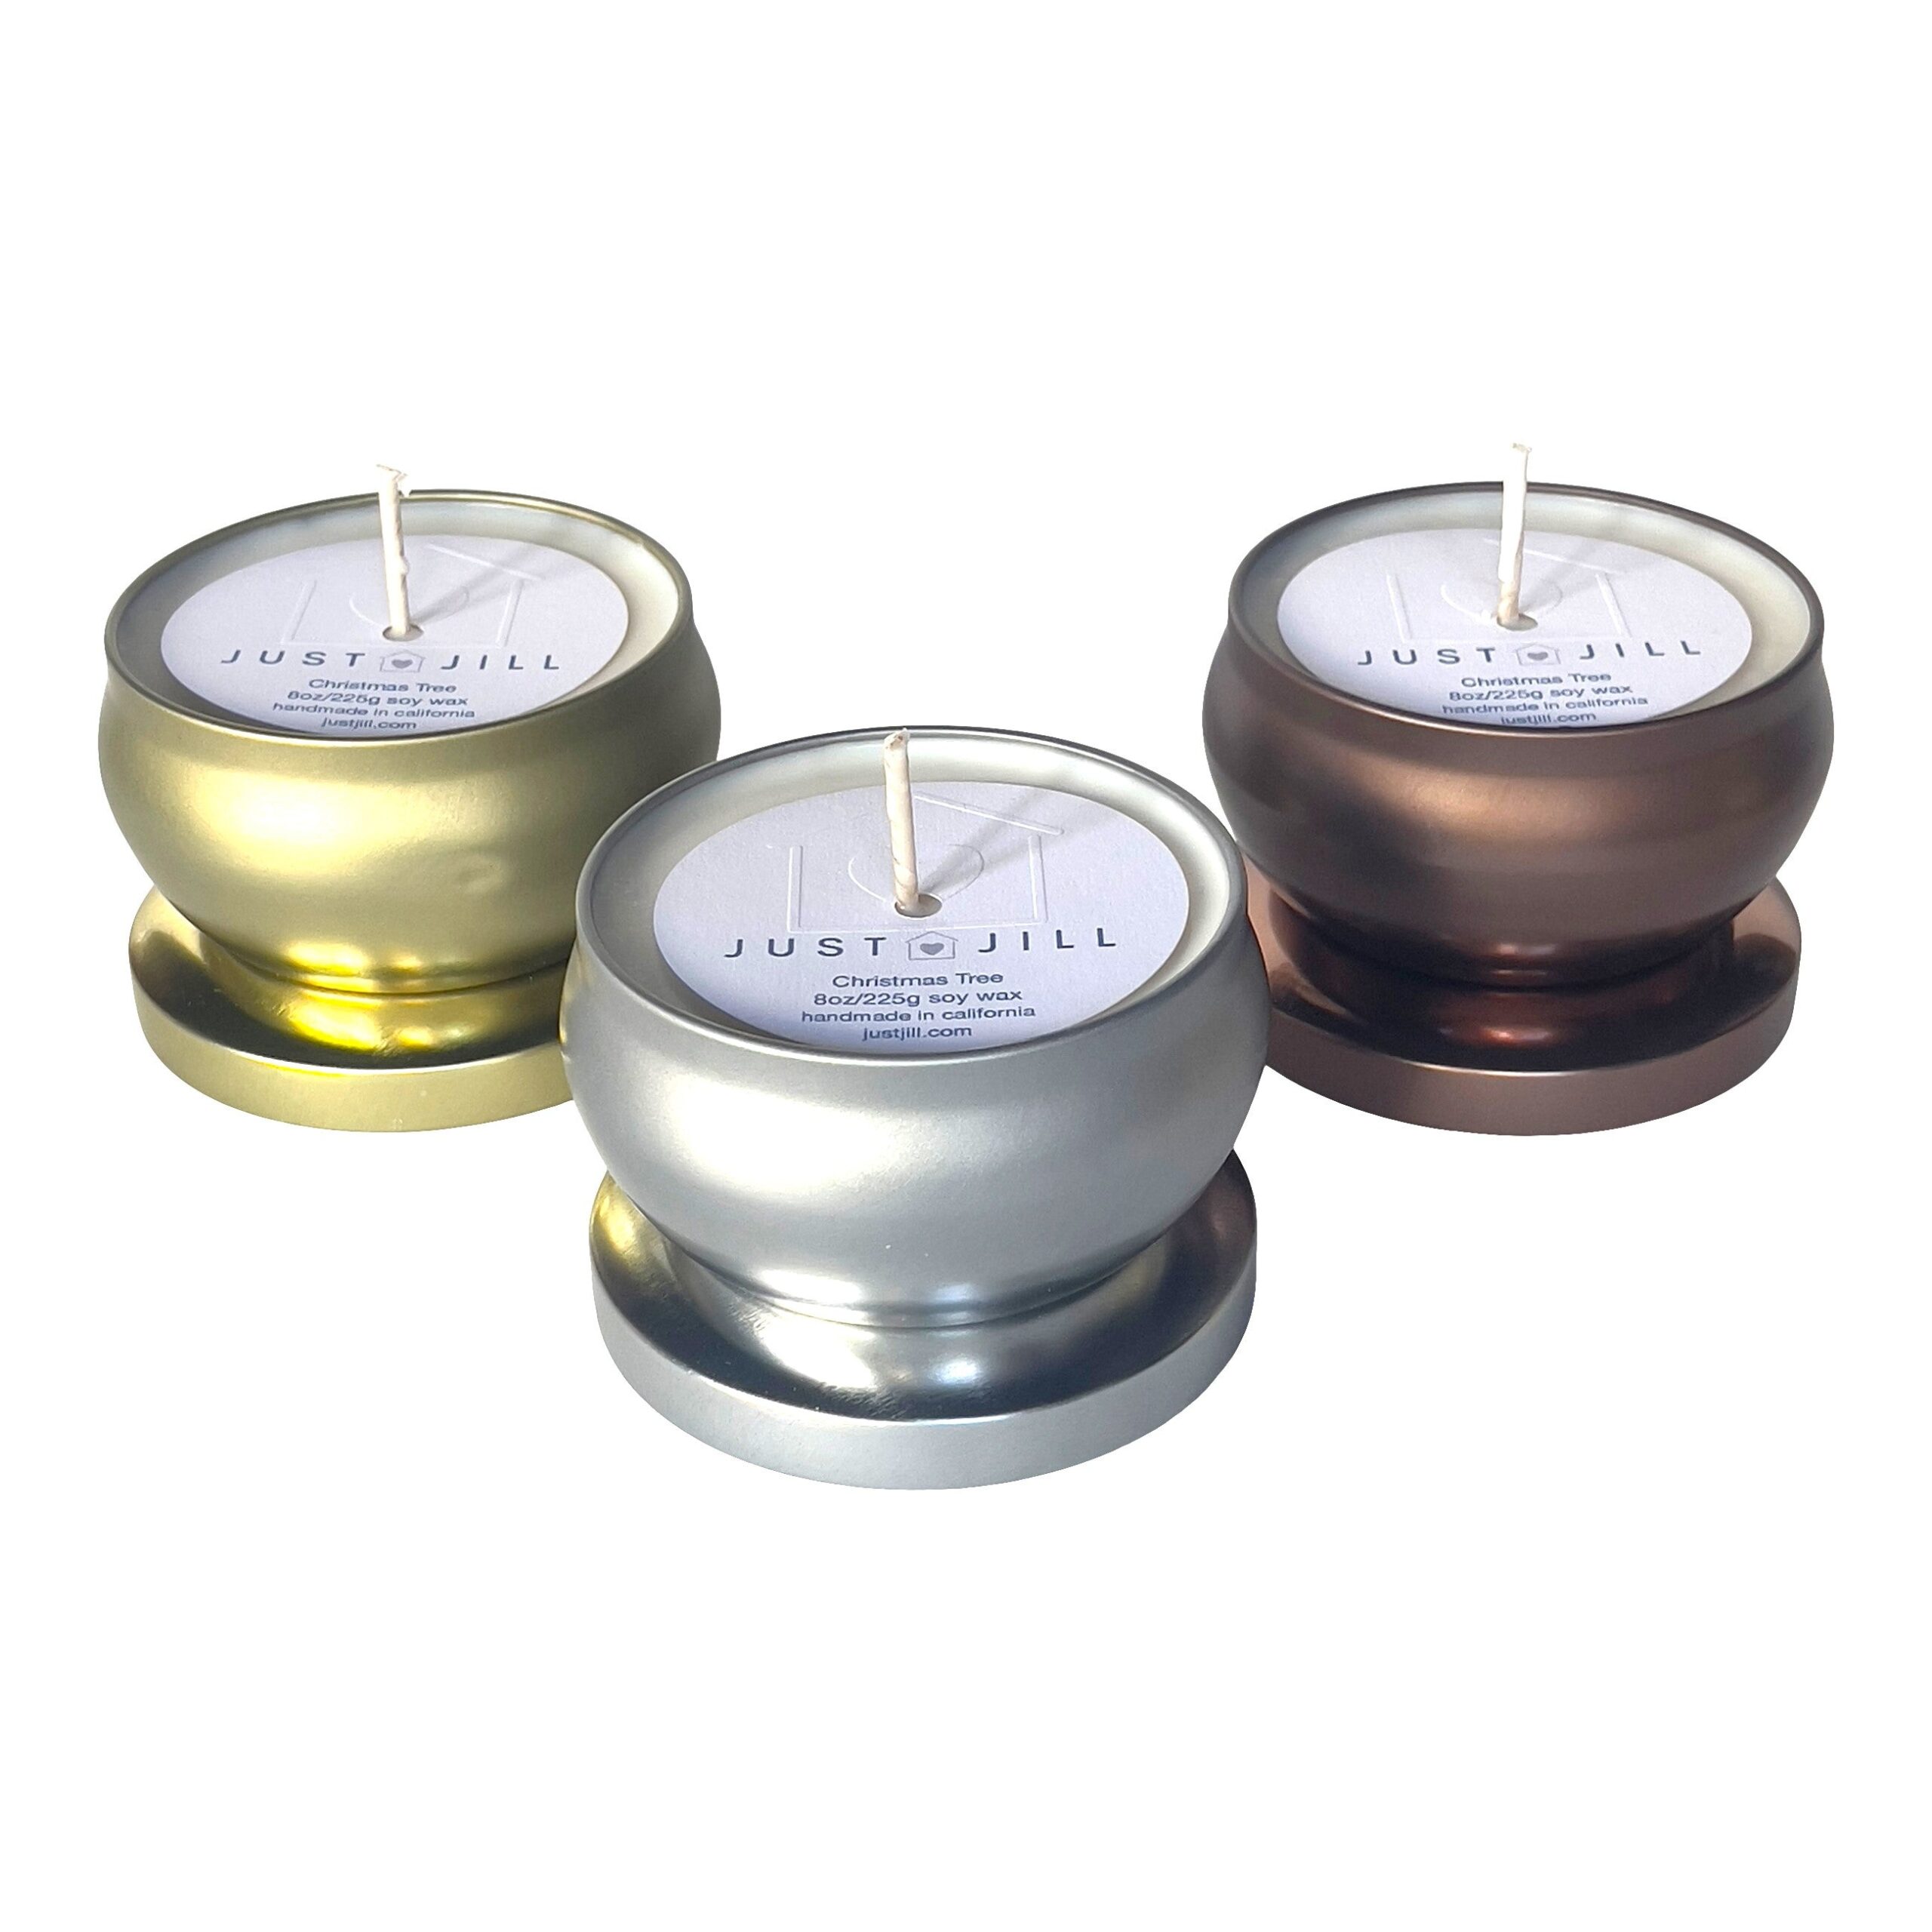 Just Jill Set of 3 Christmas Tree Scent Candle Tins